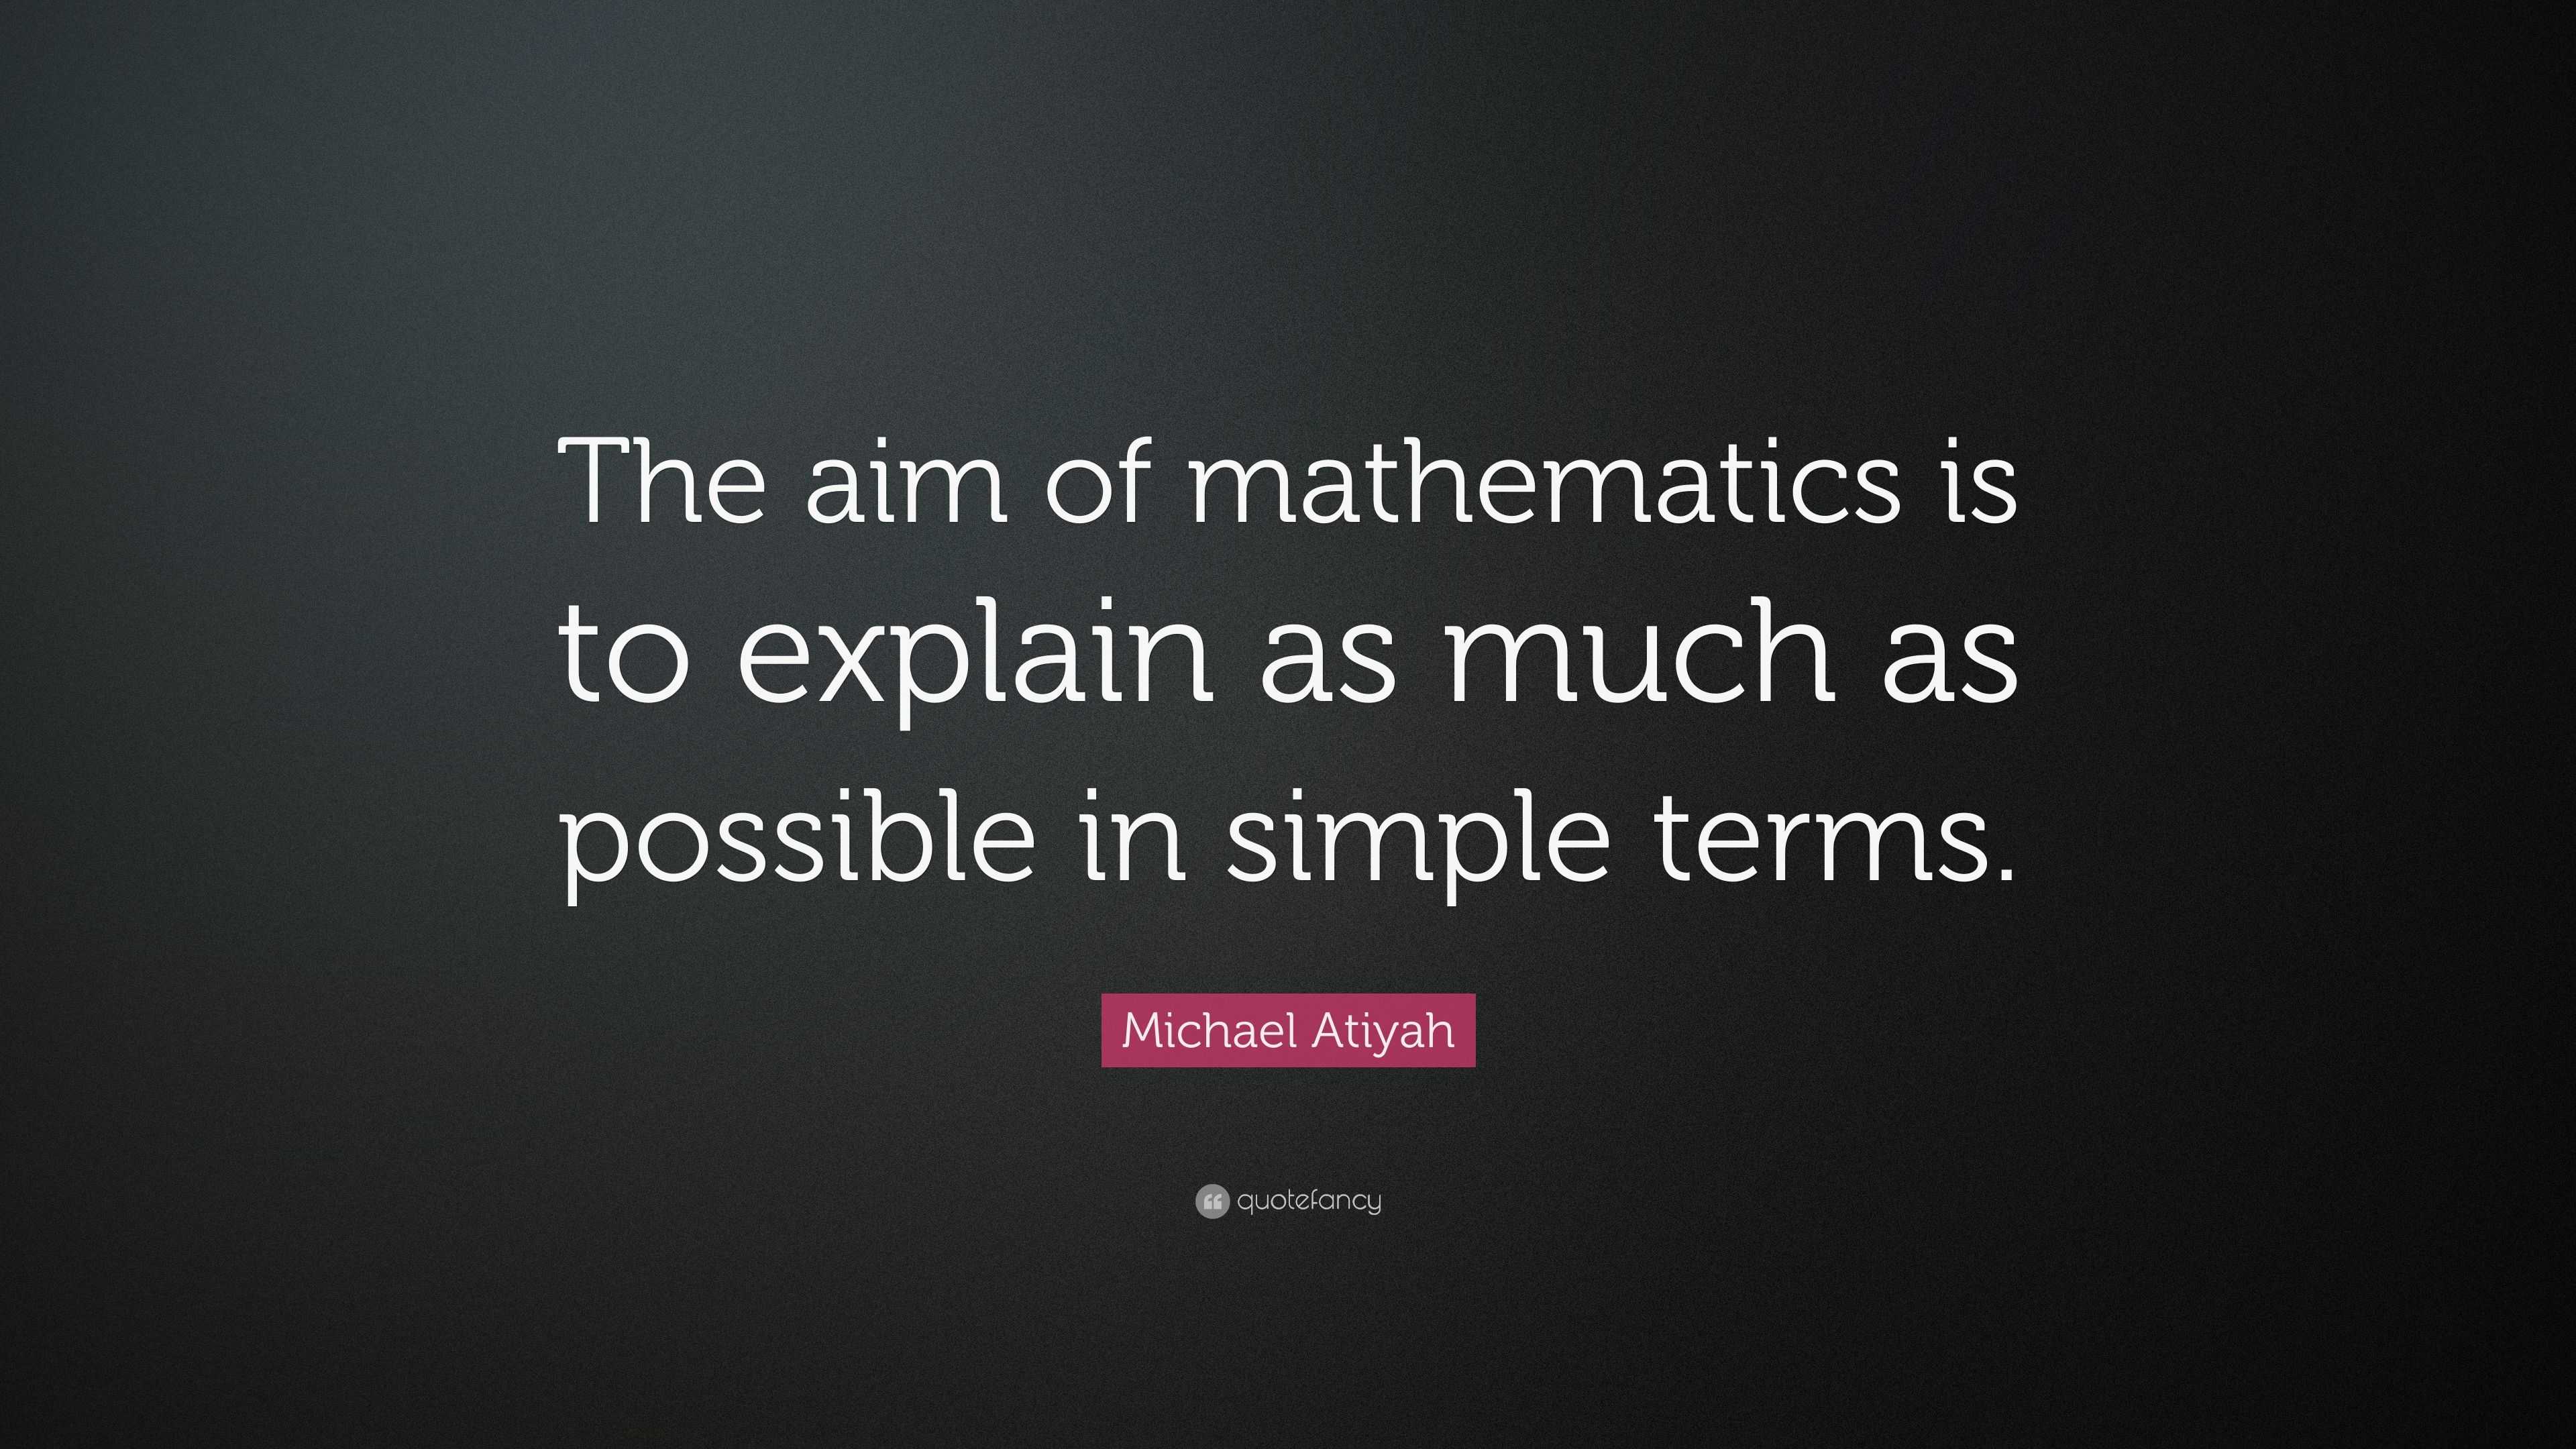 Michael Atiyah Quote: “The aim of mathematics is to explain as much as ...